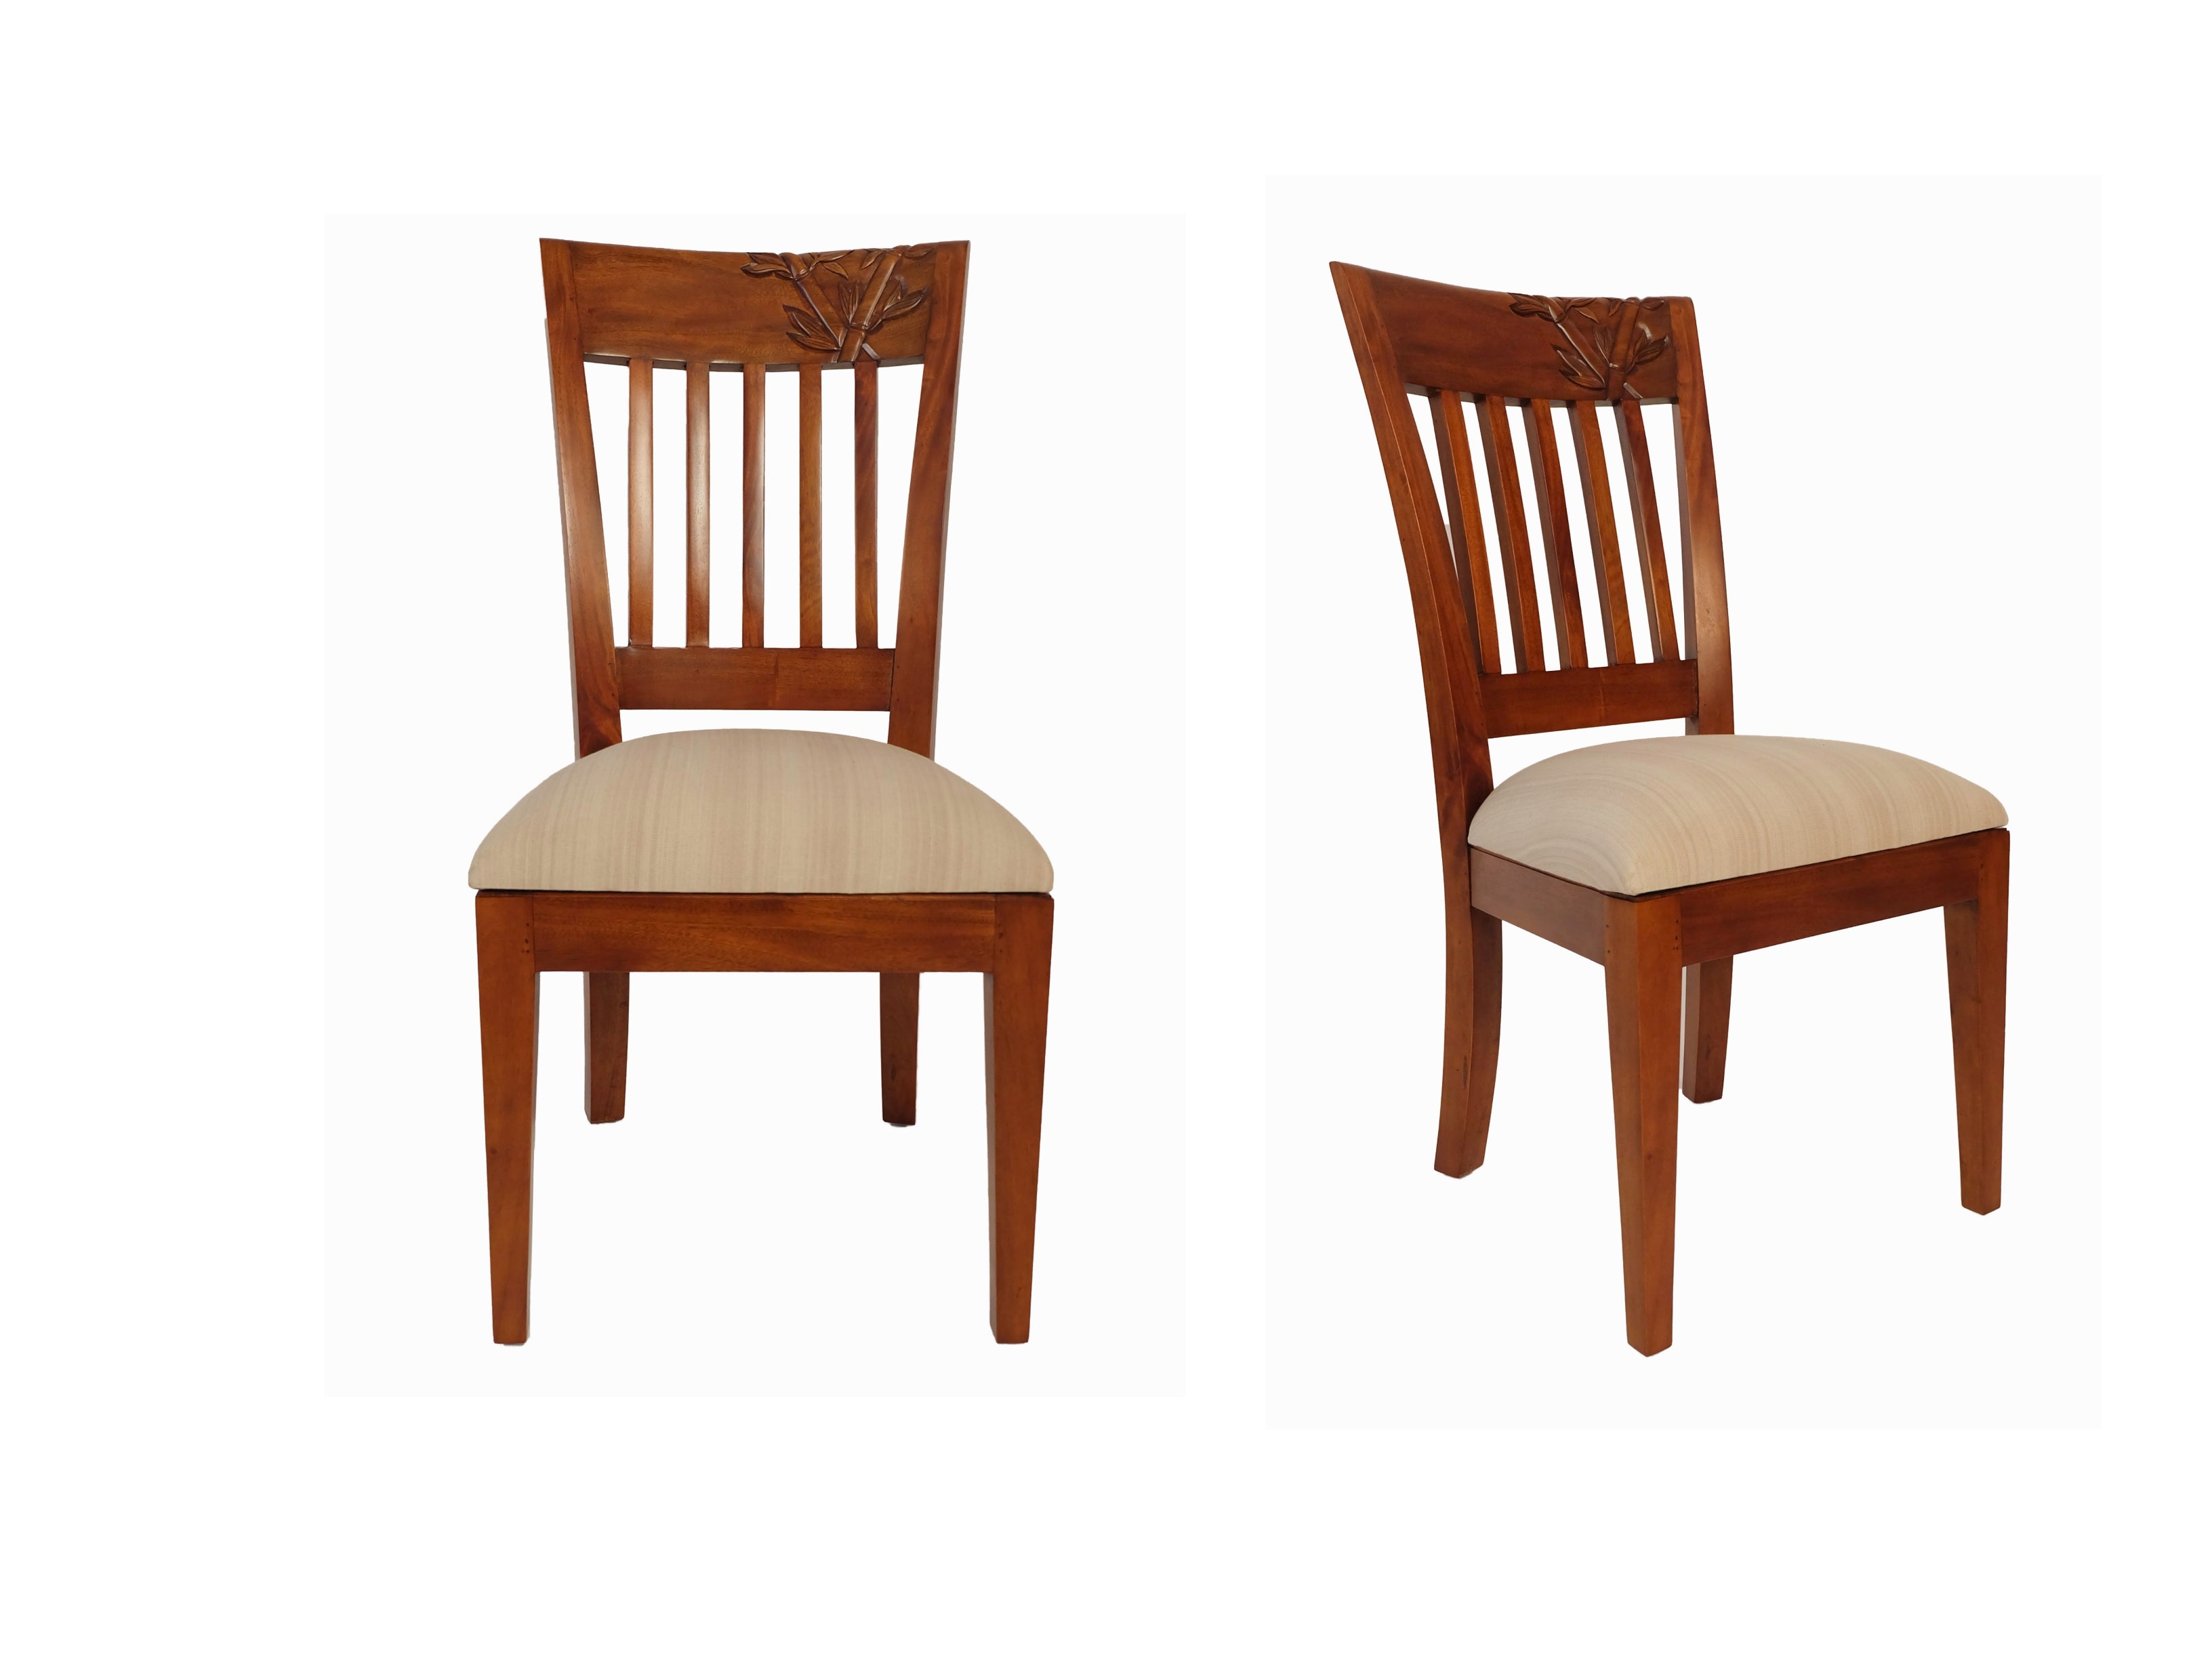 U - Base with Bamboo Carved Chairs